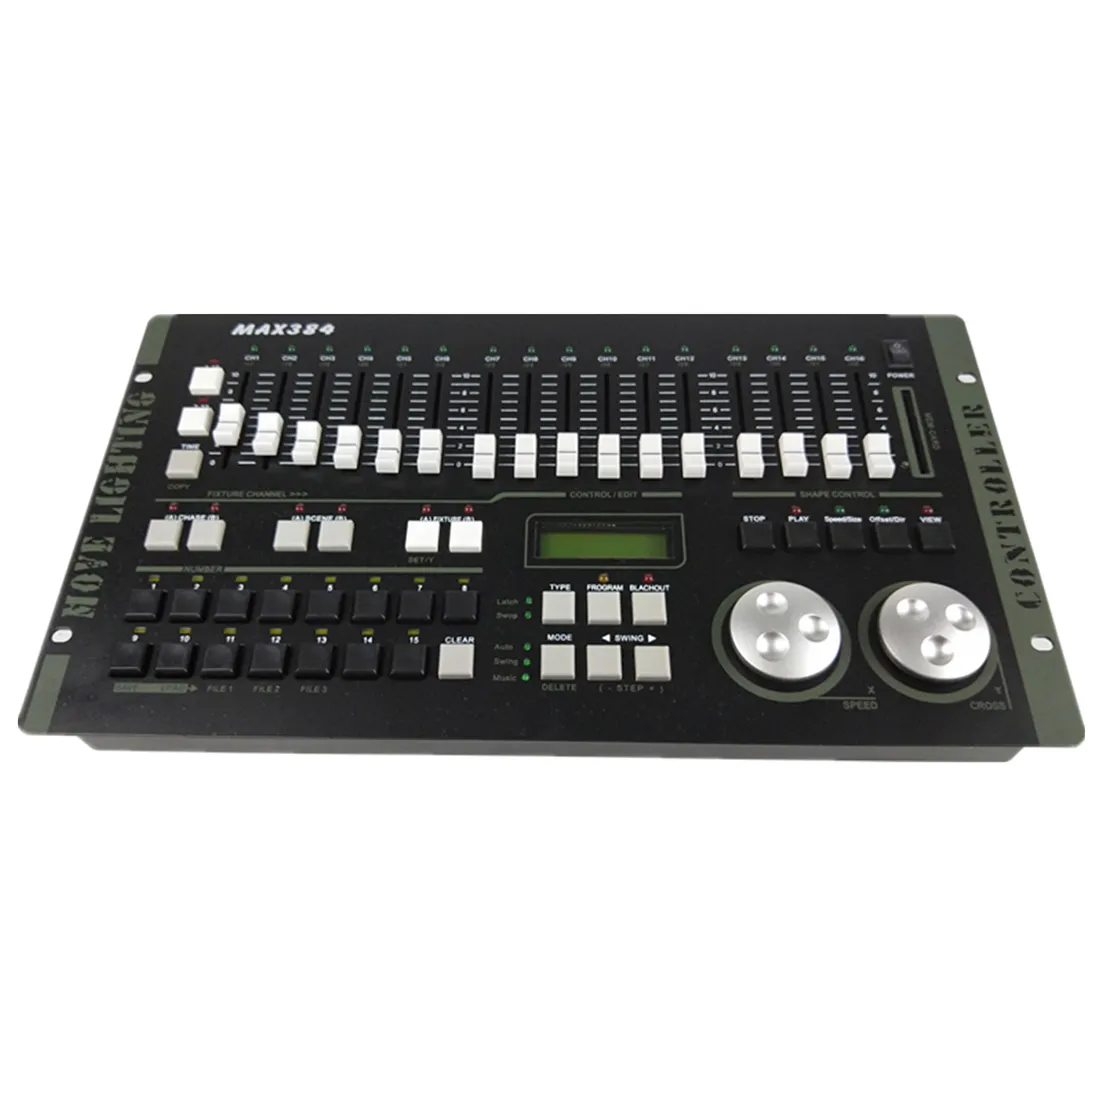 Led Stage Equipment Max 384 Dmx 512 Console Dmx Lighting Controller